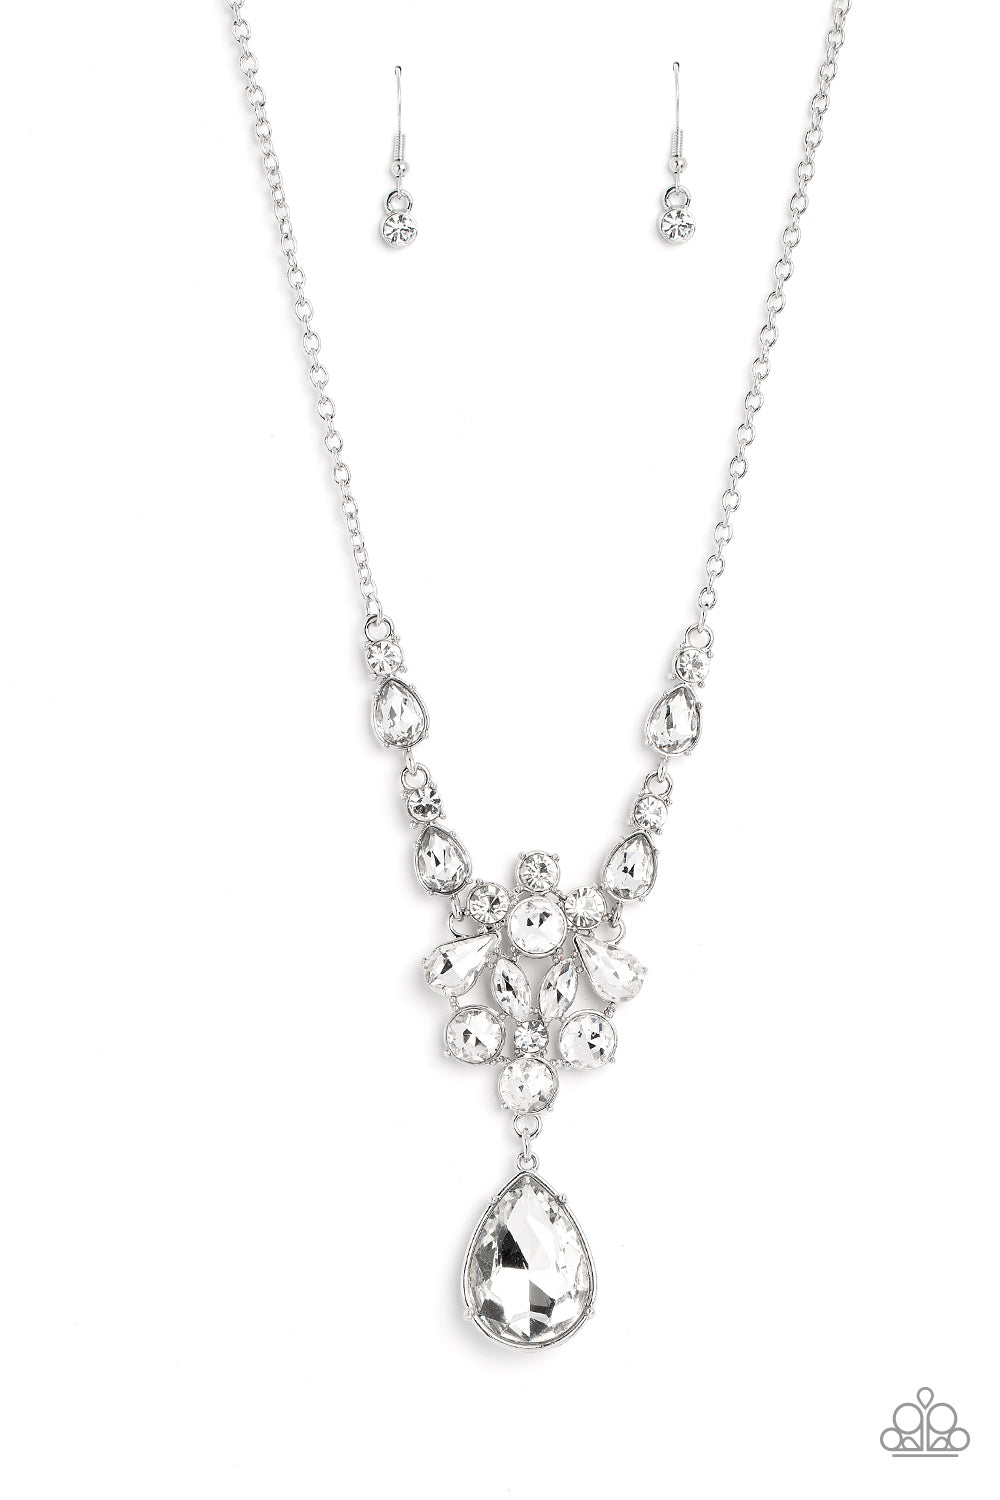 Paparazzi Necklace ~ TWINKLE of an Eye - White